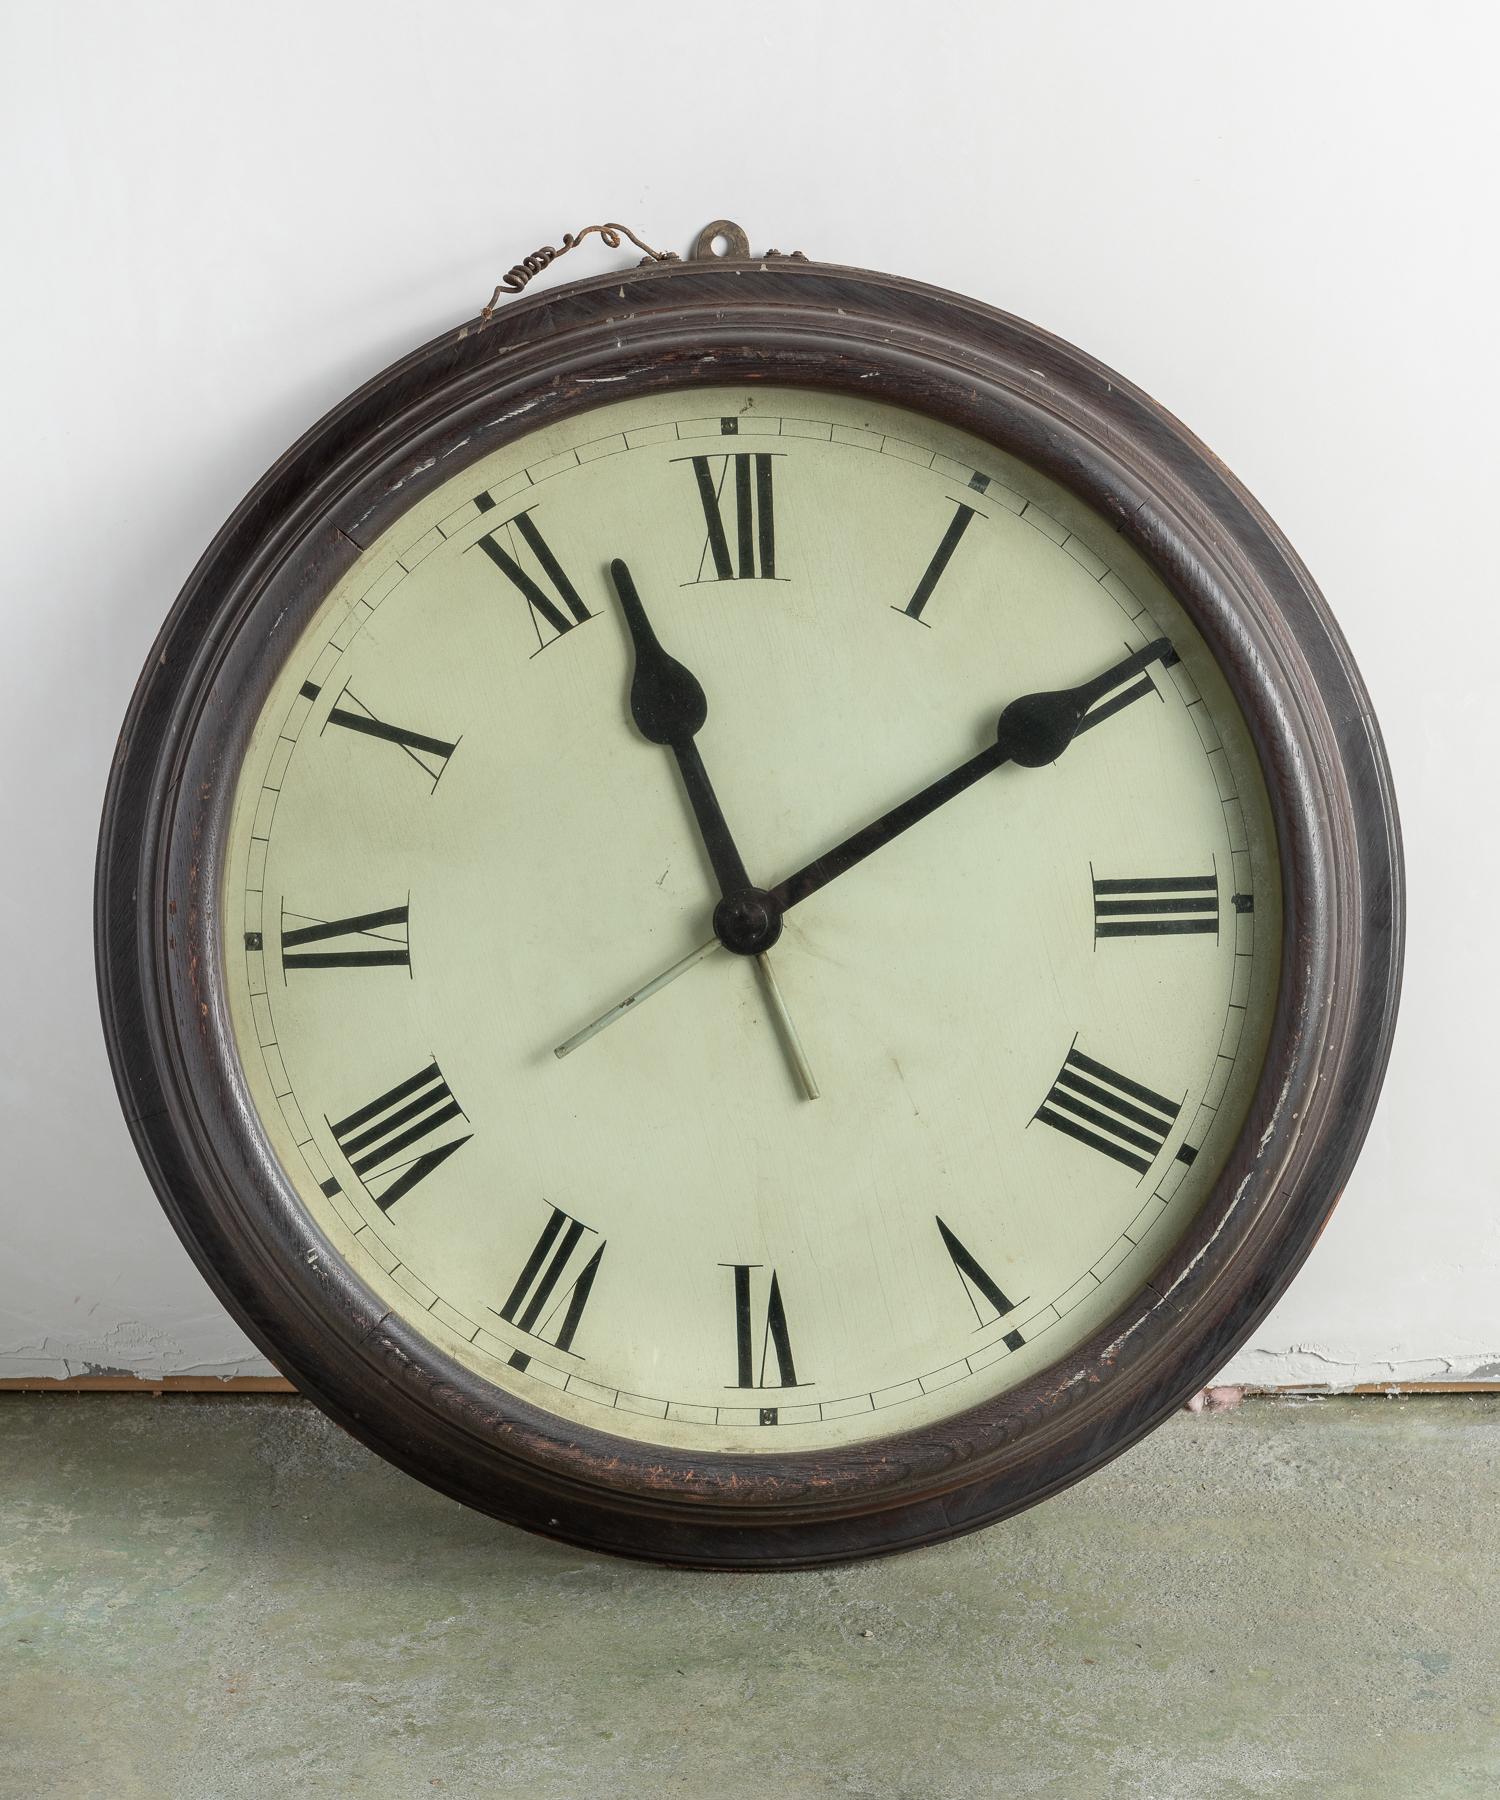 New England Prep School Hall Clock, America, 19th Century

Well patinated wood frame with elegant roman numeral markings.

This piece ships from Providence, Rhode Island.